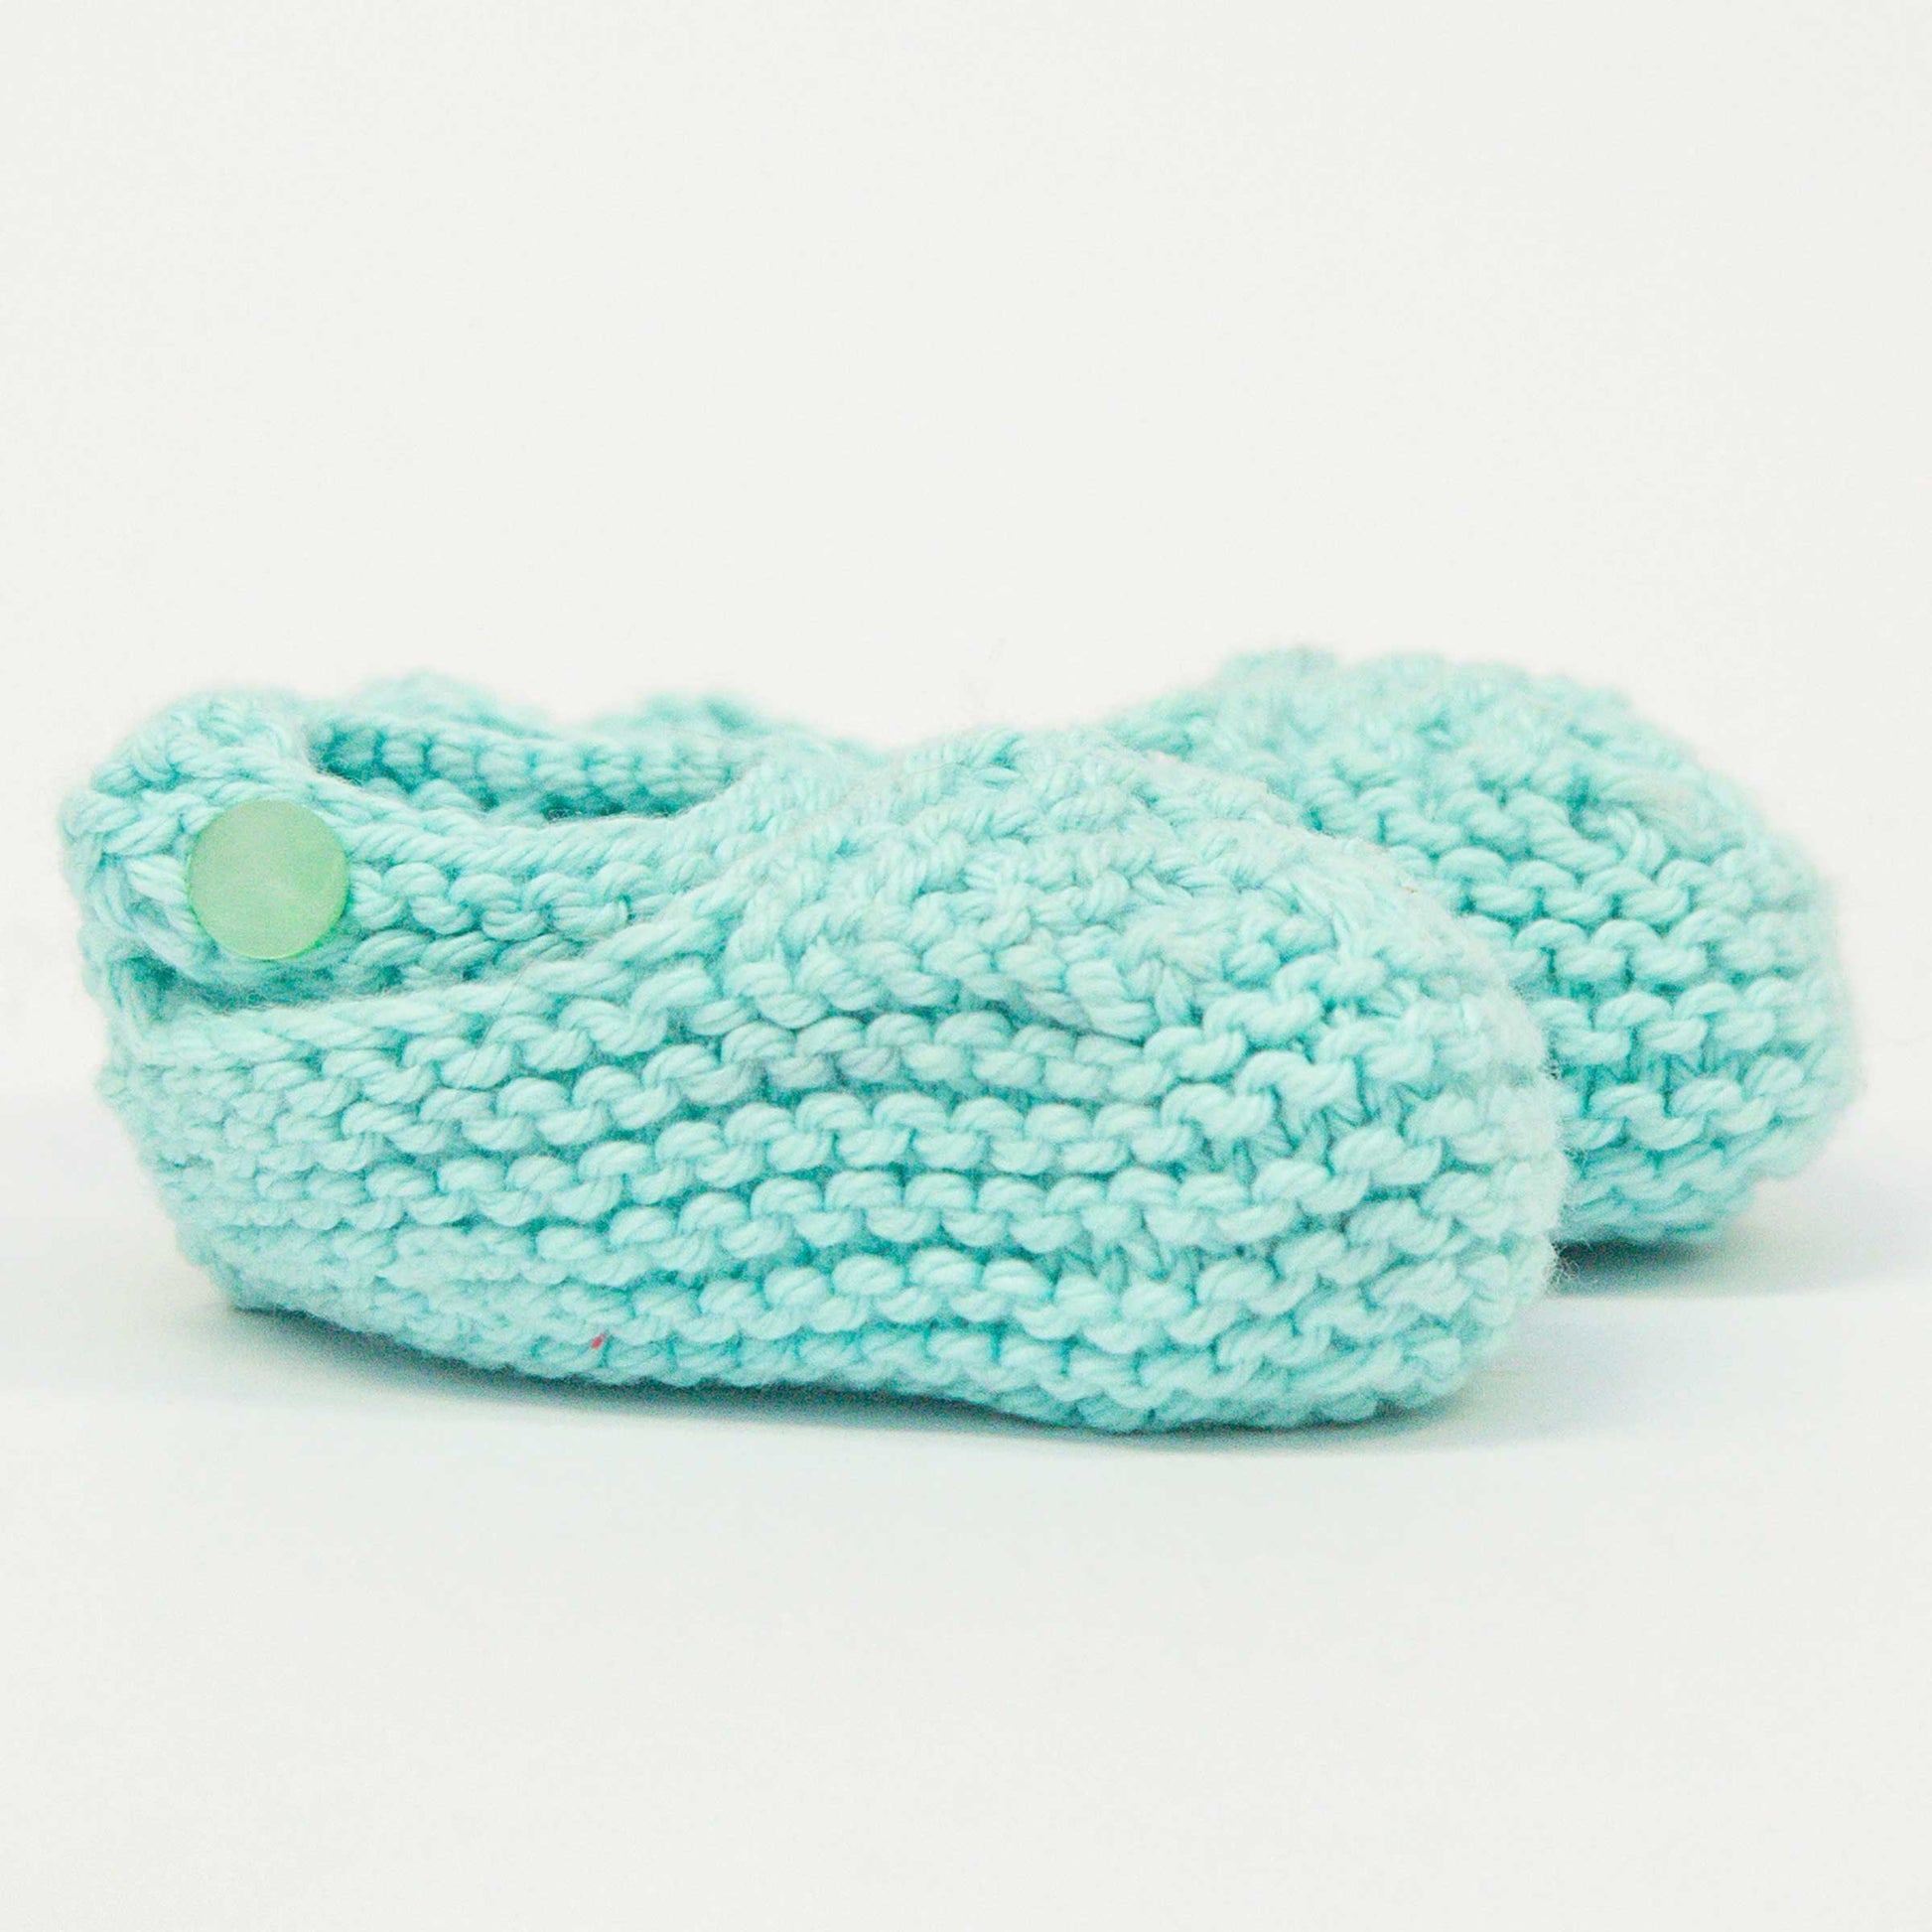 Mary Jane shoes, Hand Knit, 100% Cotton, Custo buttons, washable, Teal, Teal Buttons